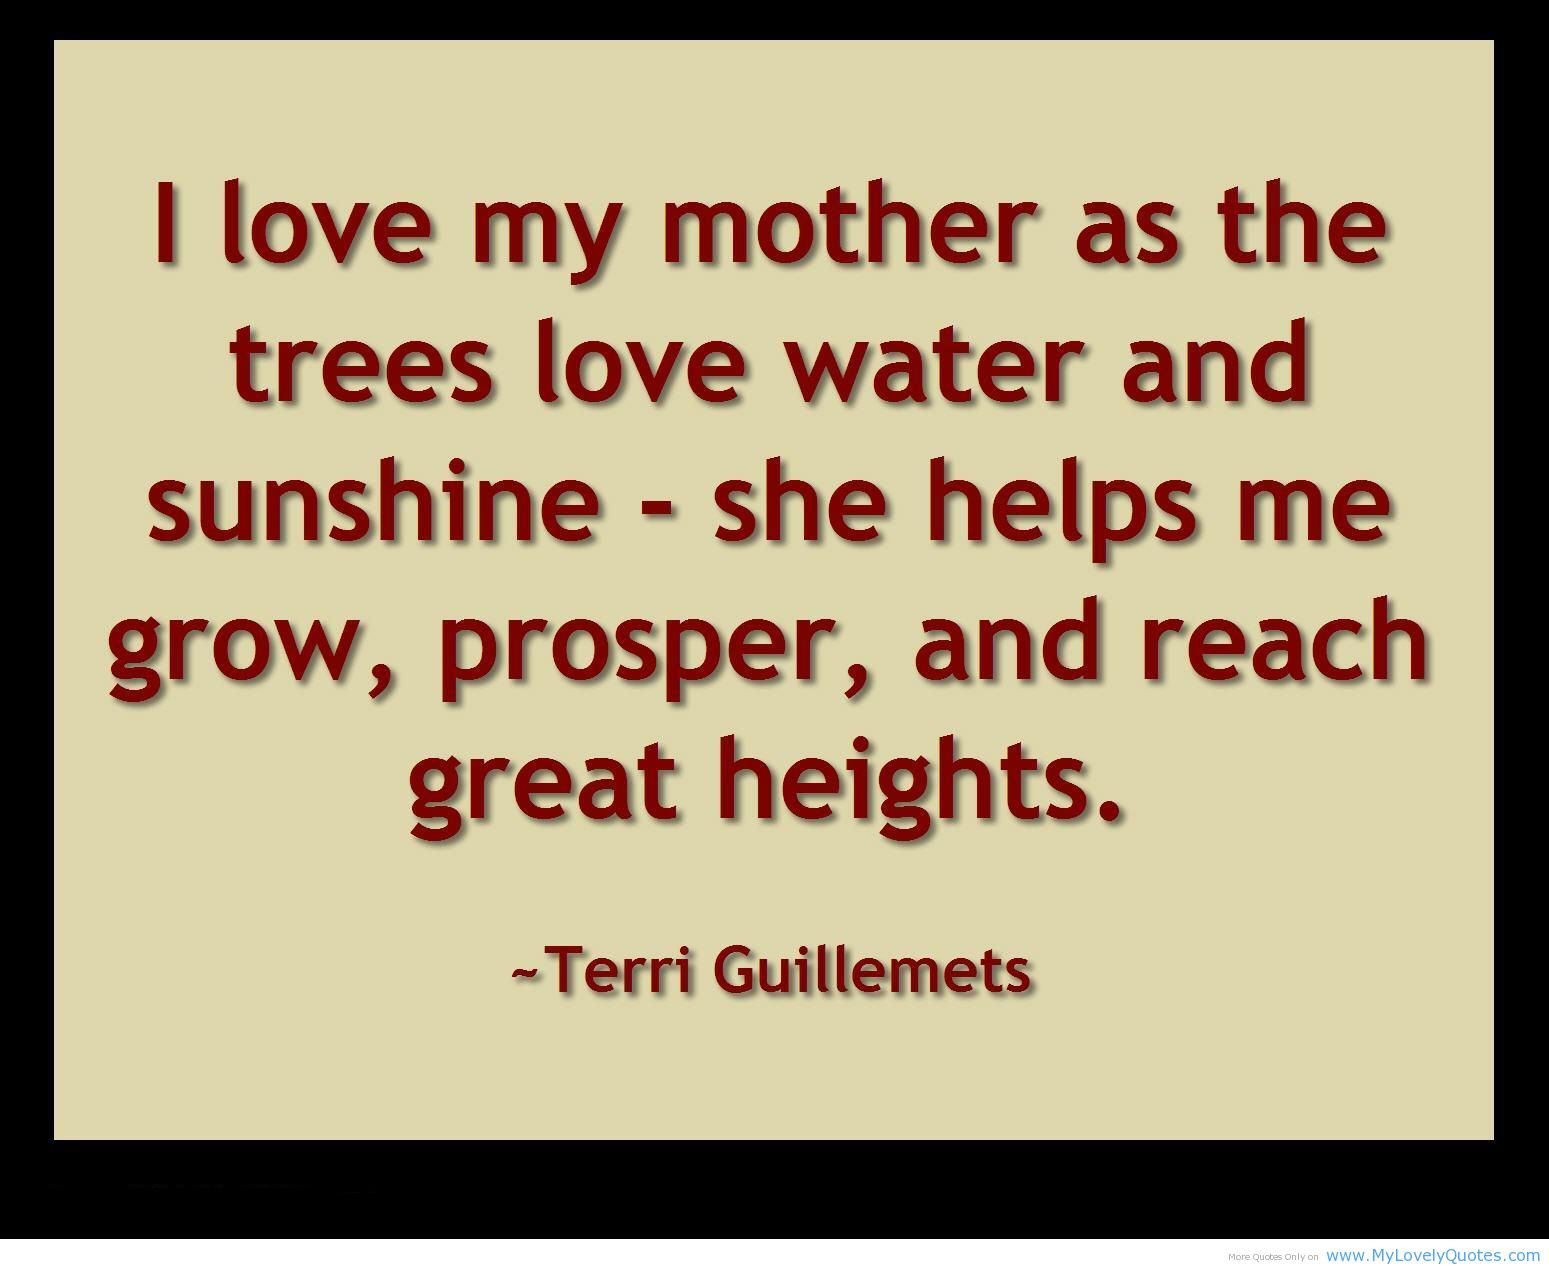 Quotes On Mother Love
 Quotes About Mothers Love QuotesGram